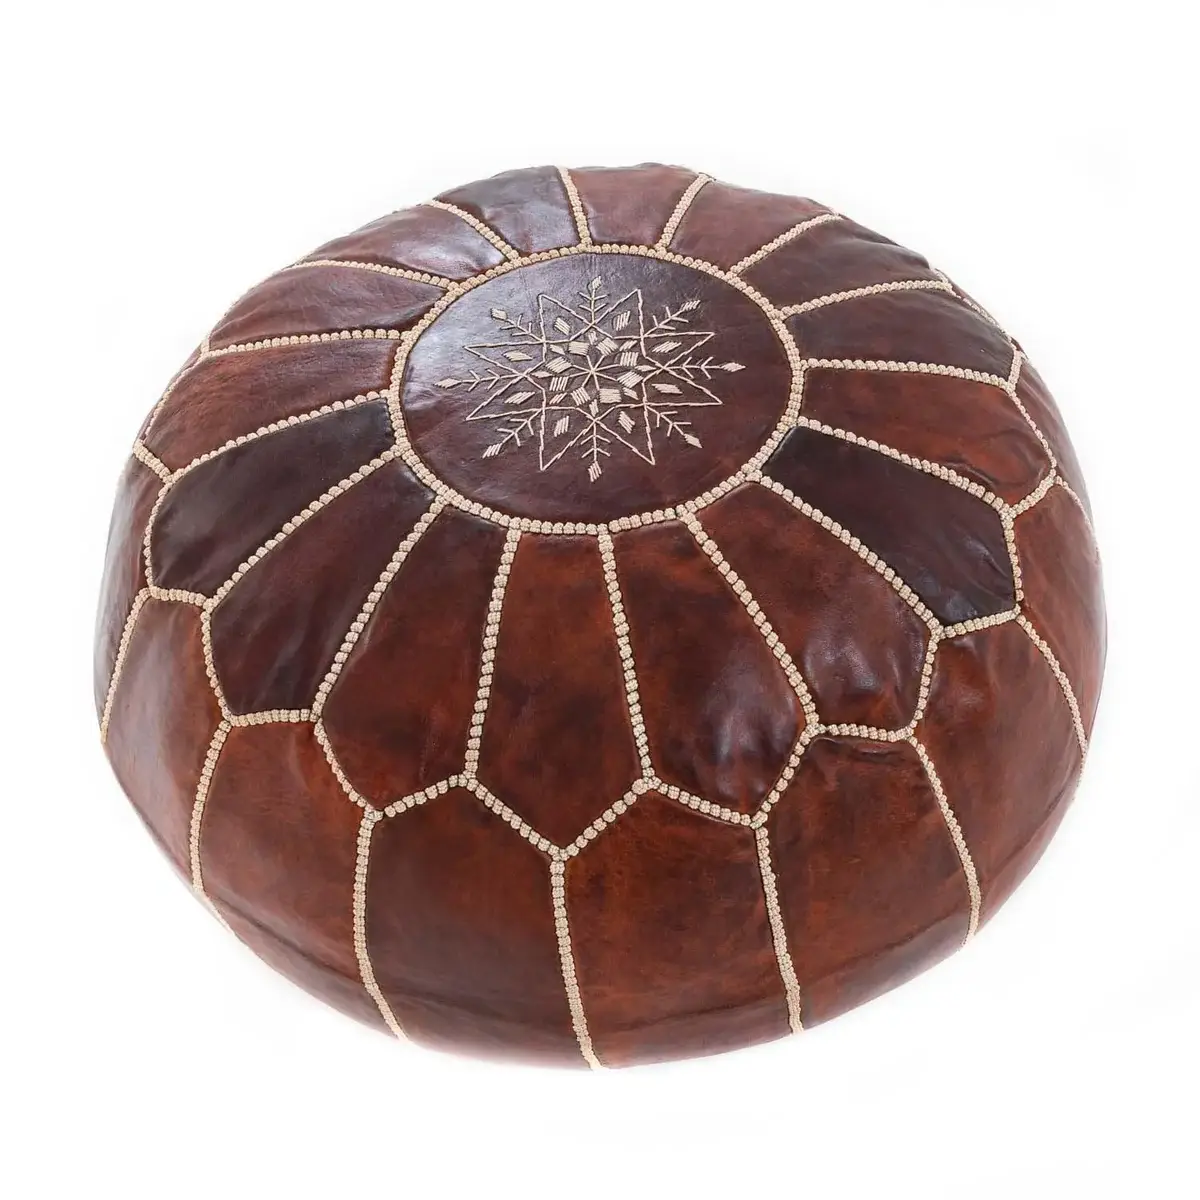 Authentic Moroccan Leather Pouf - Chocolate